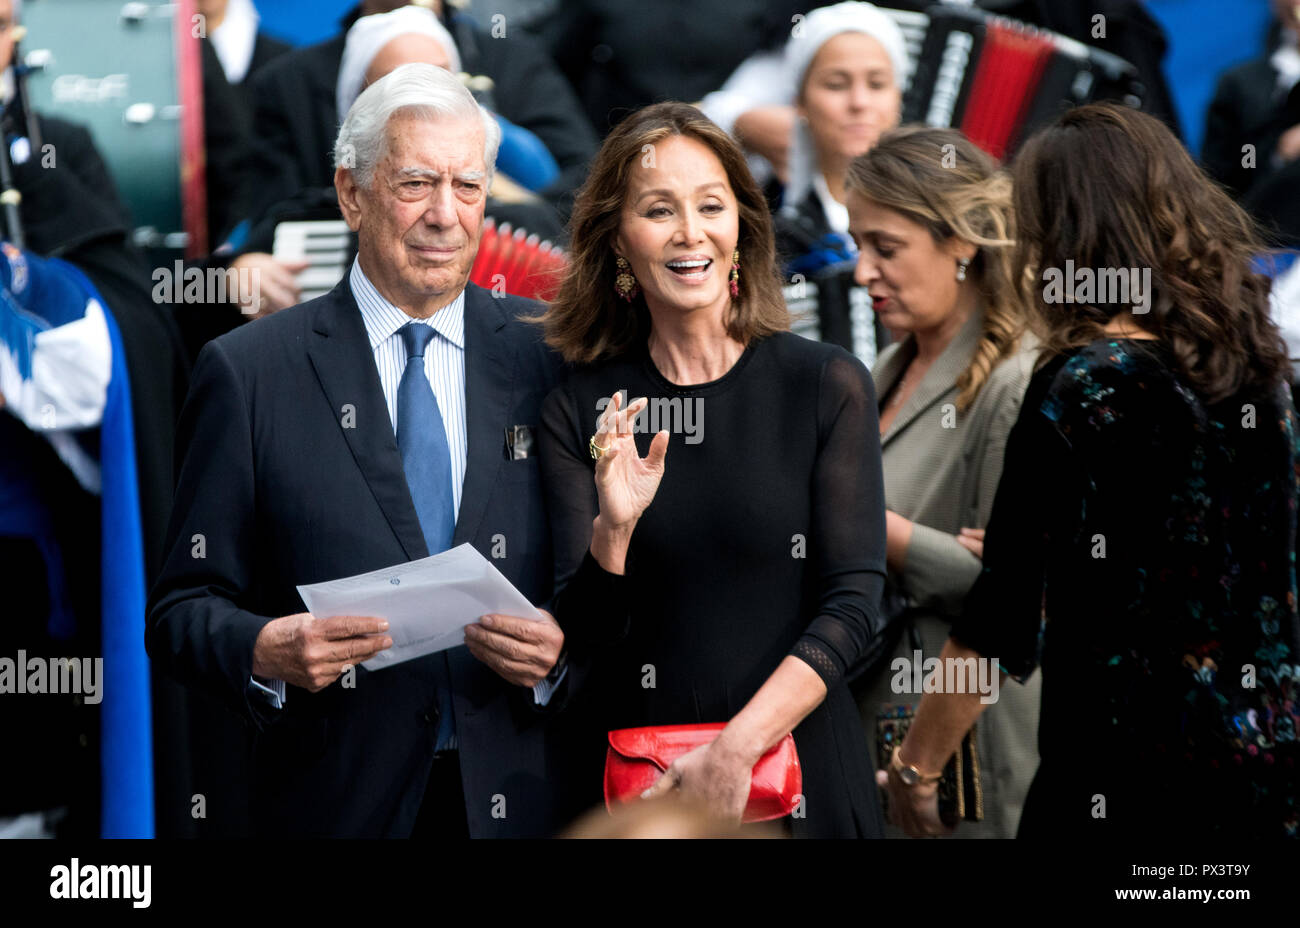 Oviedo, Spain. 19th October, 2018. Peruvian writer Mario Vargas LLosa and Filipina socialite Isabel Preysler, arrive to the ceremony of Princess of Asturias Awards at Campoamor Theatre on October 19, 2018 in Oviedo, Spain. ©David Gato/Alamy Live News Stock Photo